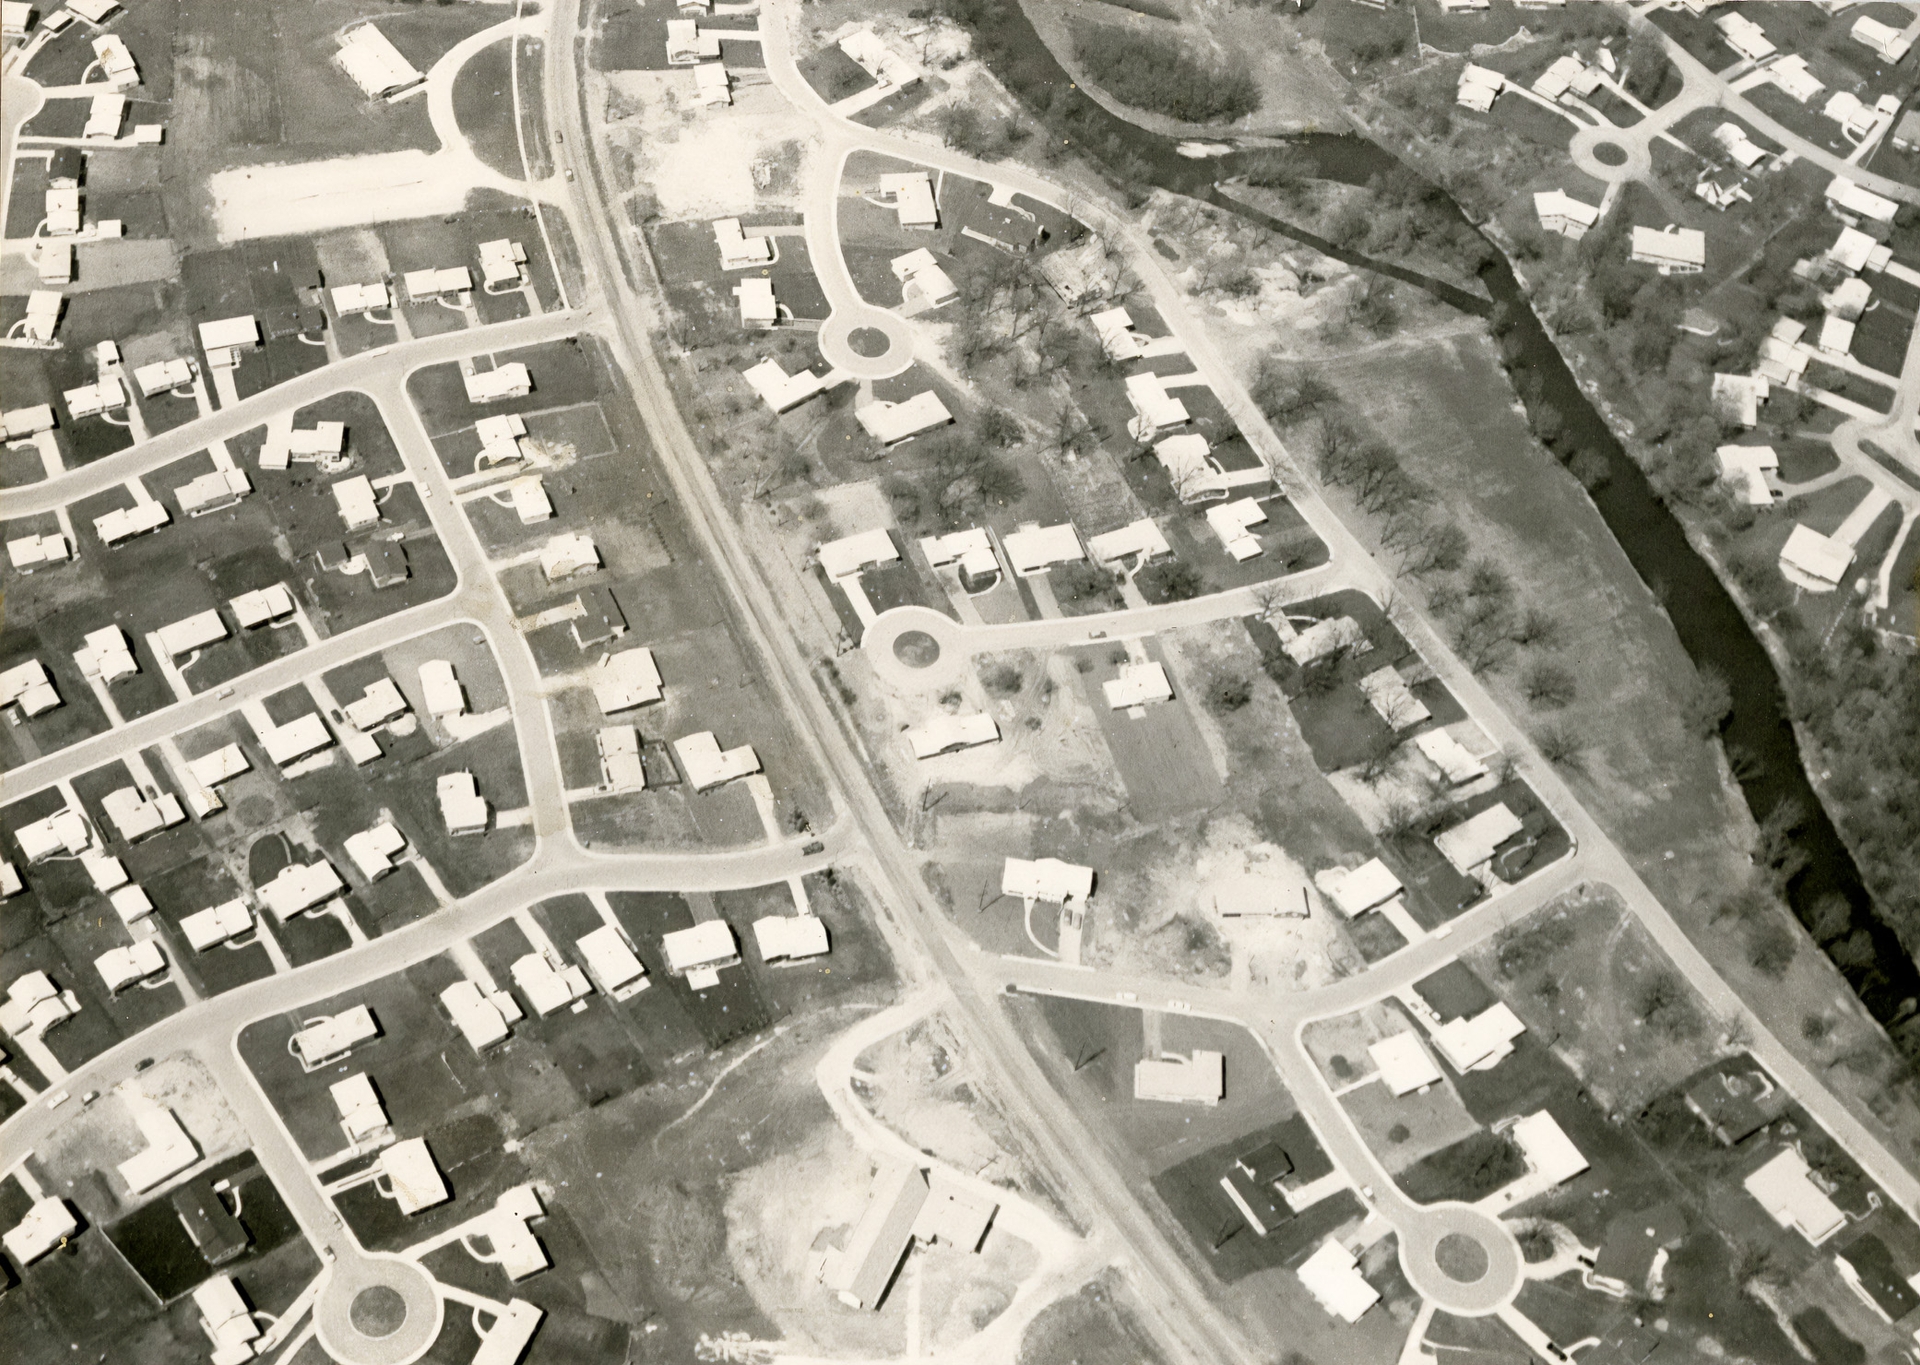 In places like Naperville, Illinois, farmland was converted into suburban tract housing during the postwar boom. Aerial view of Moser Development.